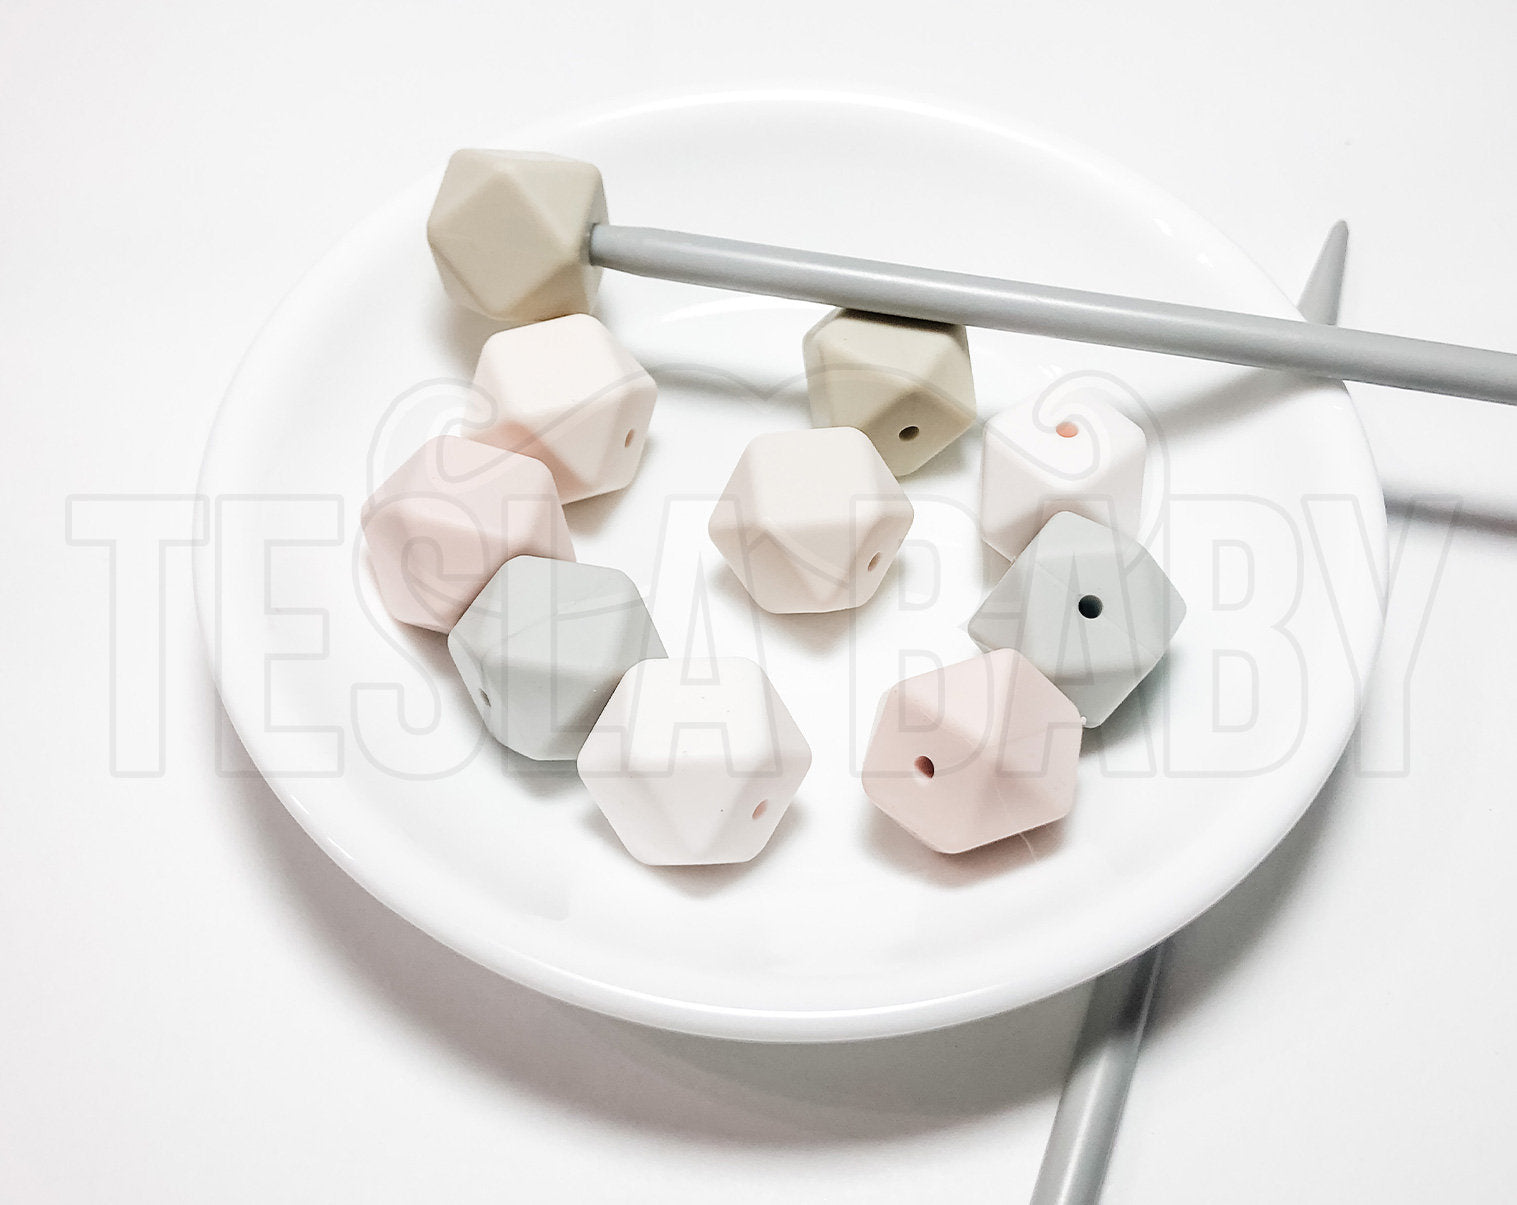 Knitting Needle Stoppers - Neutrals - Beader Caps - Beader Tips - Back Stoppers - Point Protectors - End Stoppers - Stitch Holder